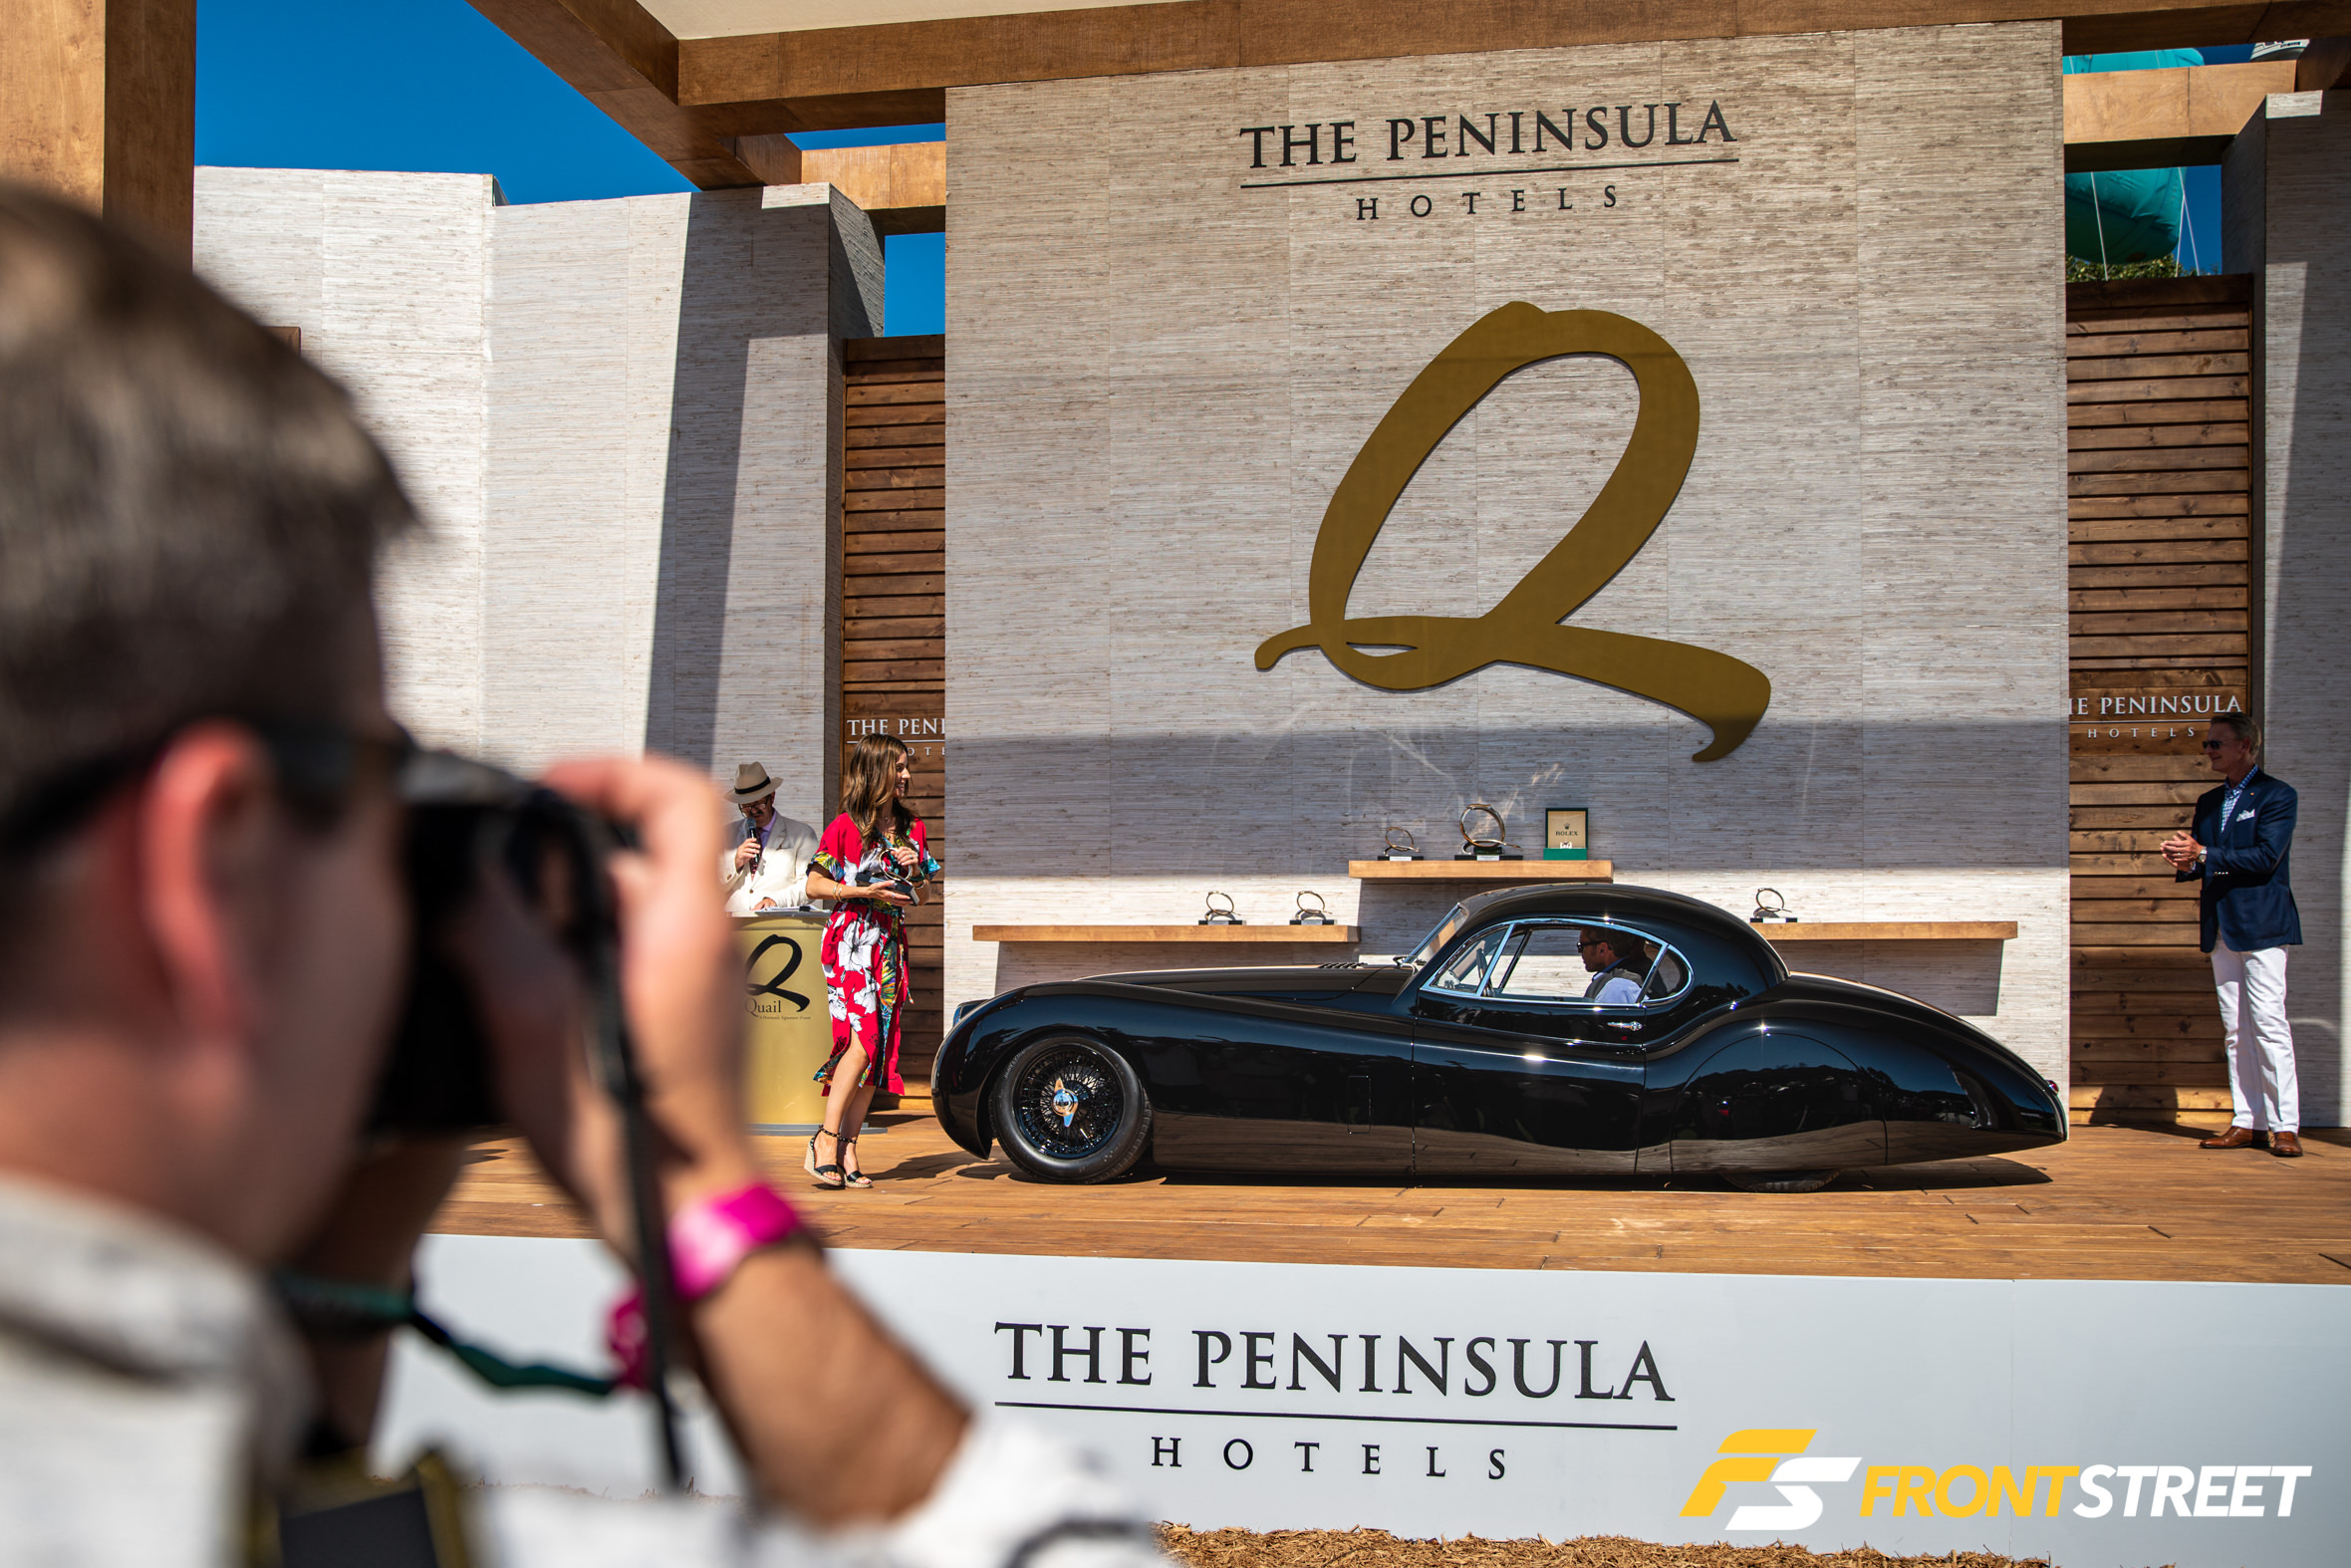 The Quail Is A Motorsports Gathering For The Ages